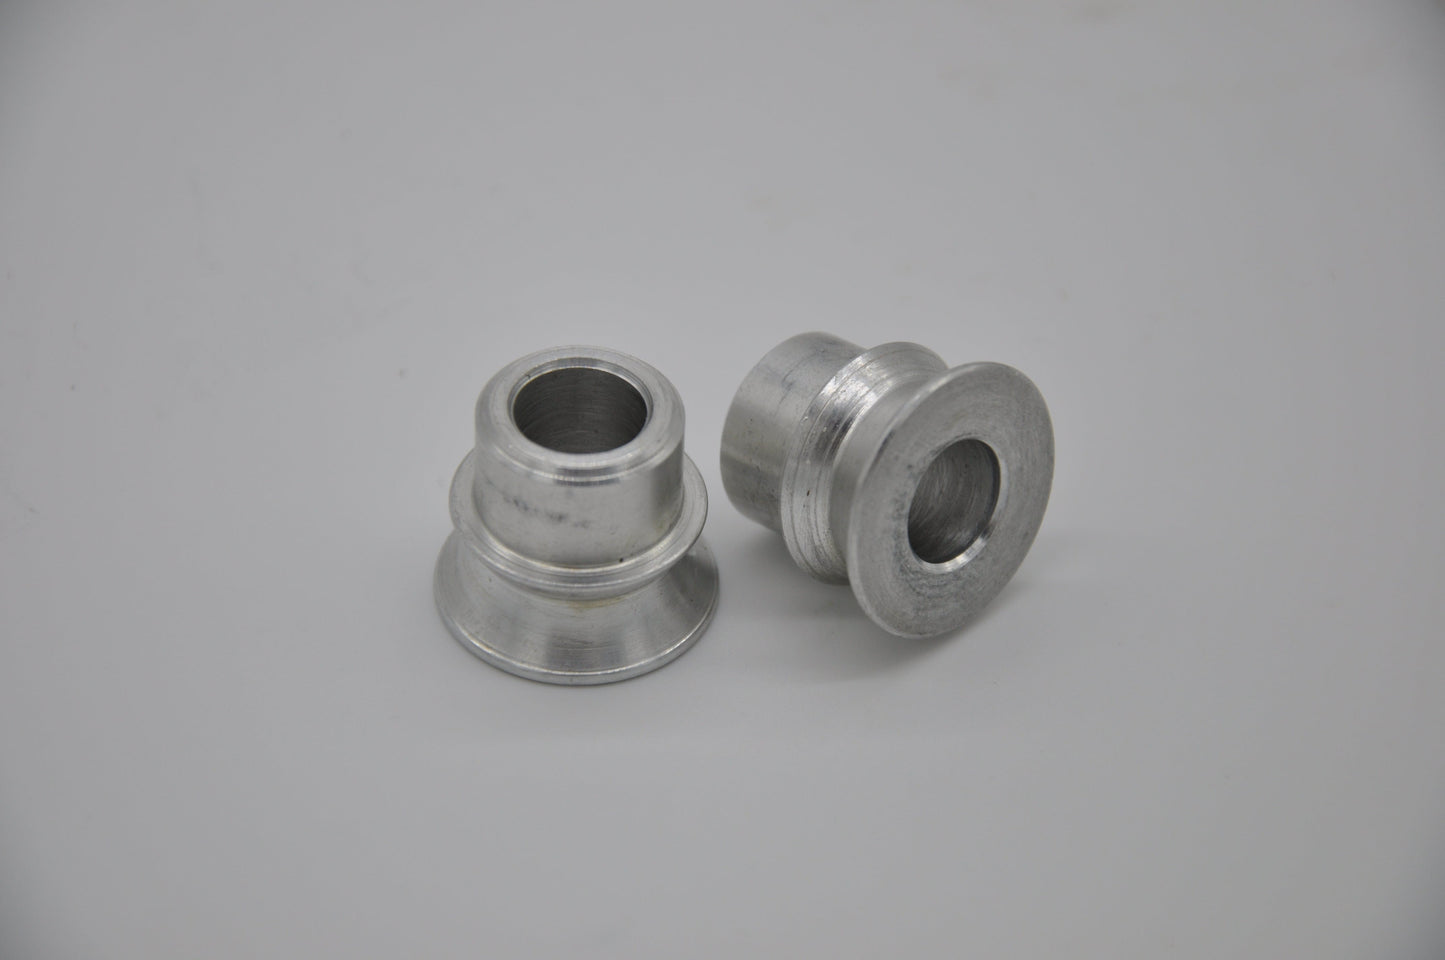 Two 10mm Misalignment Spacers for Tie Rods